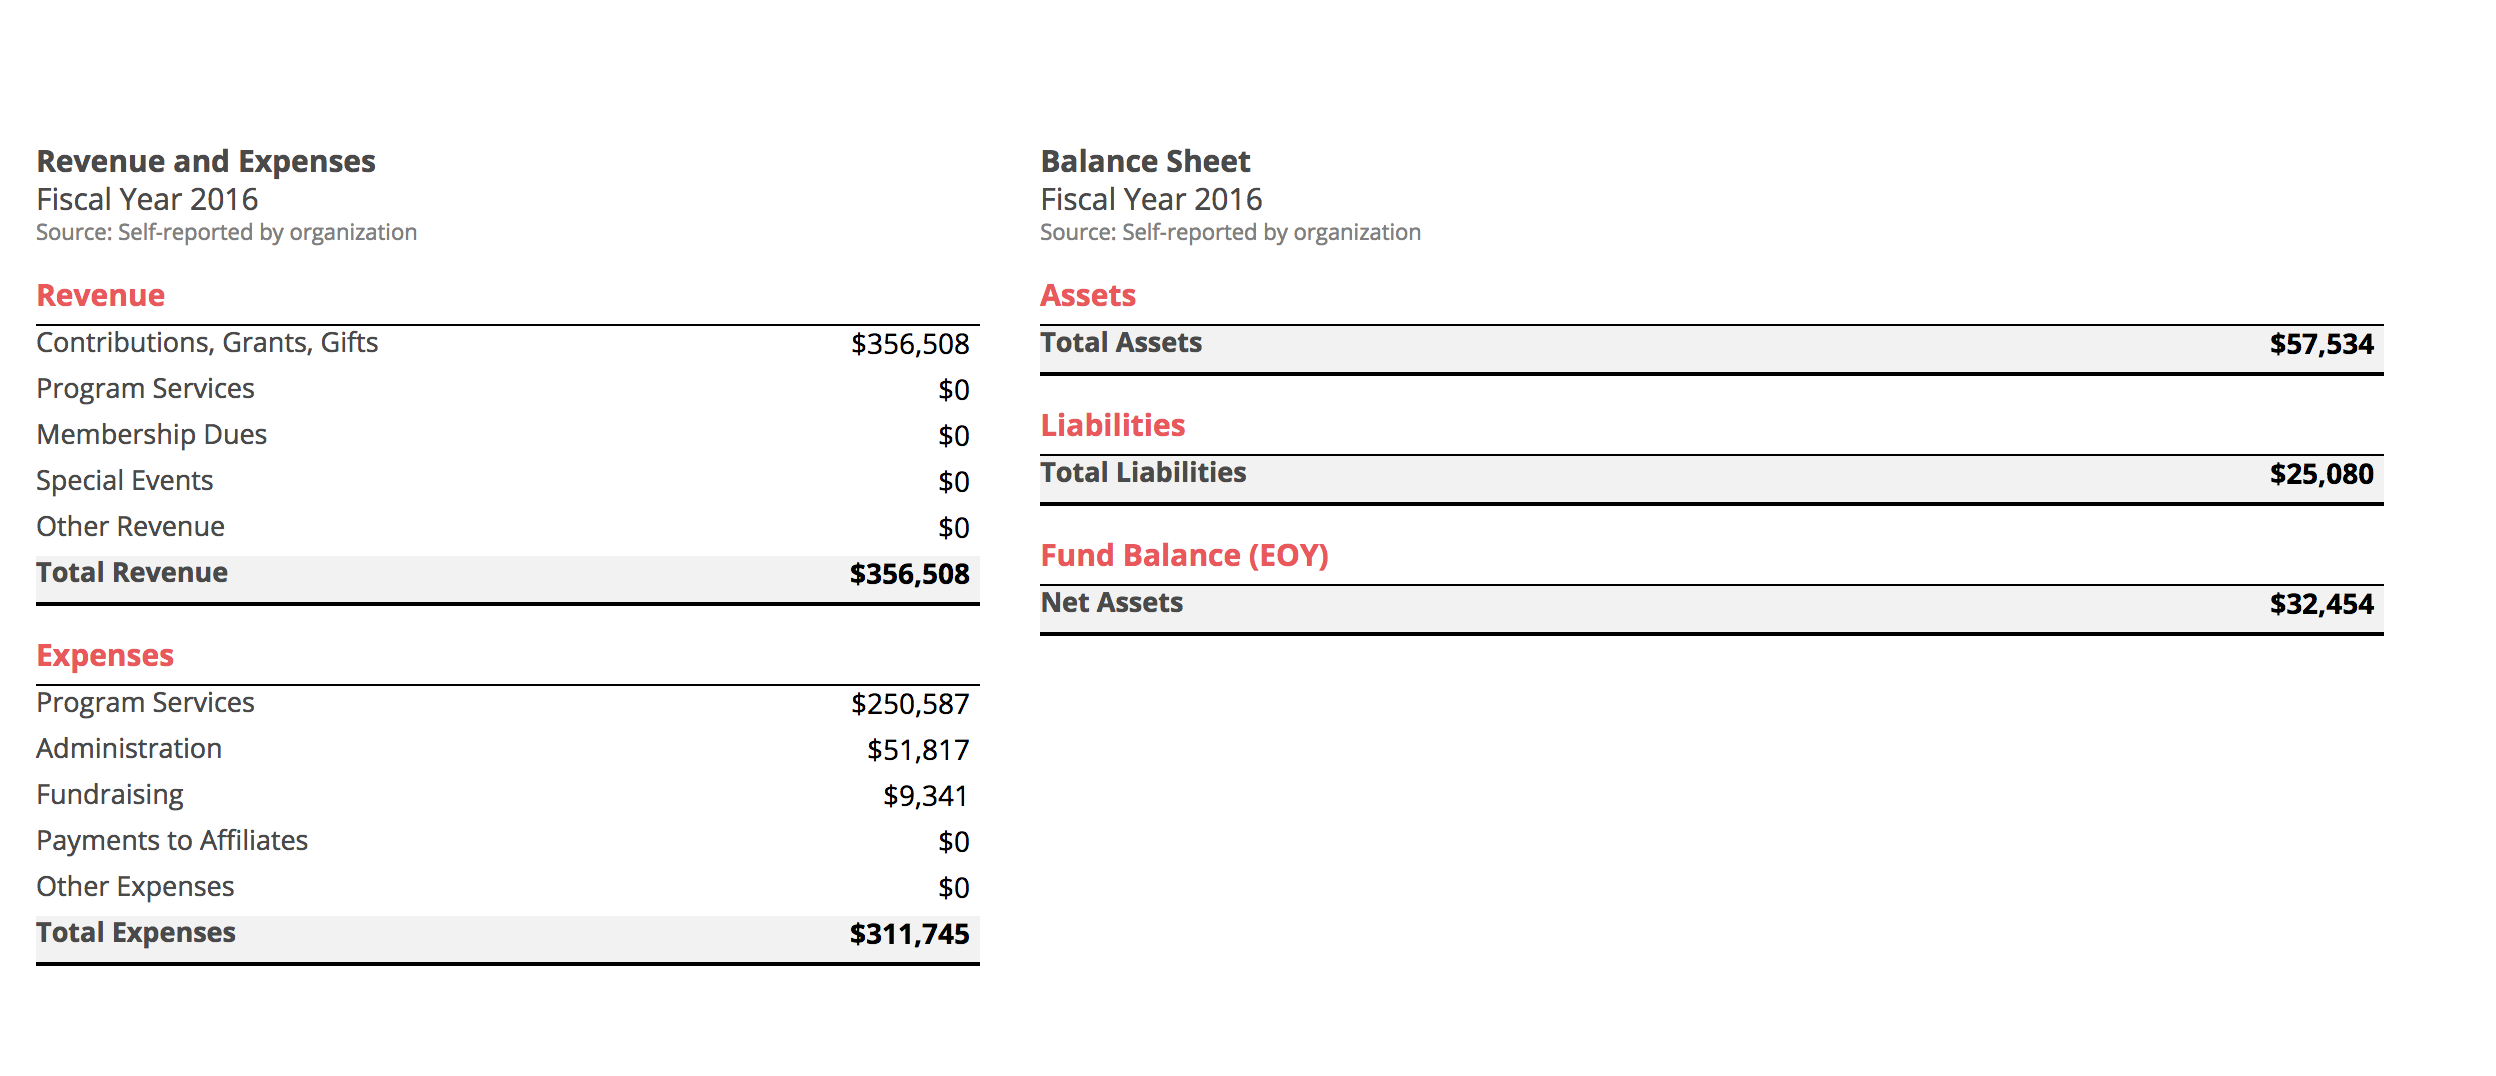 This is a snapshot of RIP Medical's financial statement from 2015 via Guidestar.org